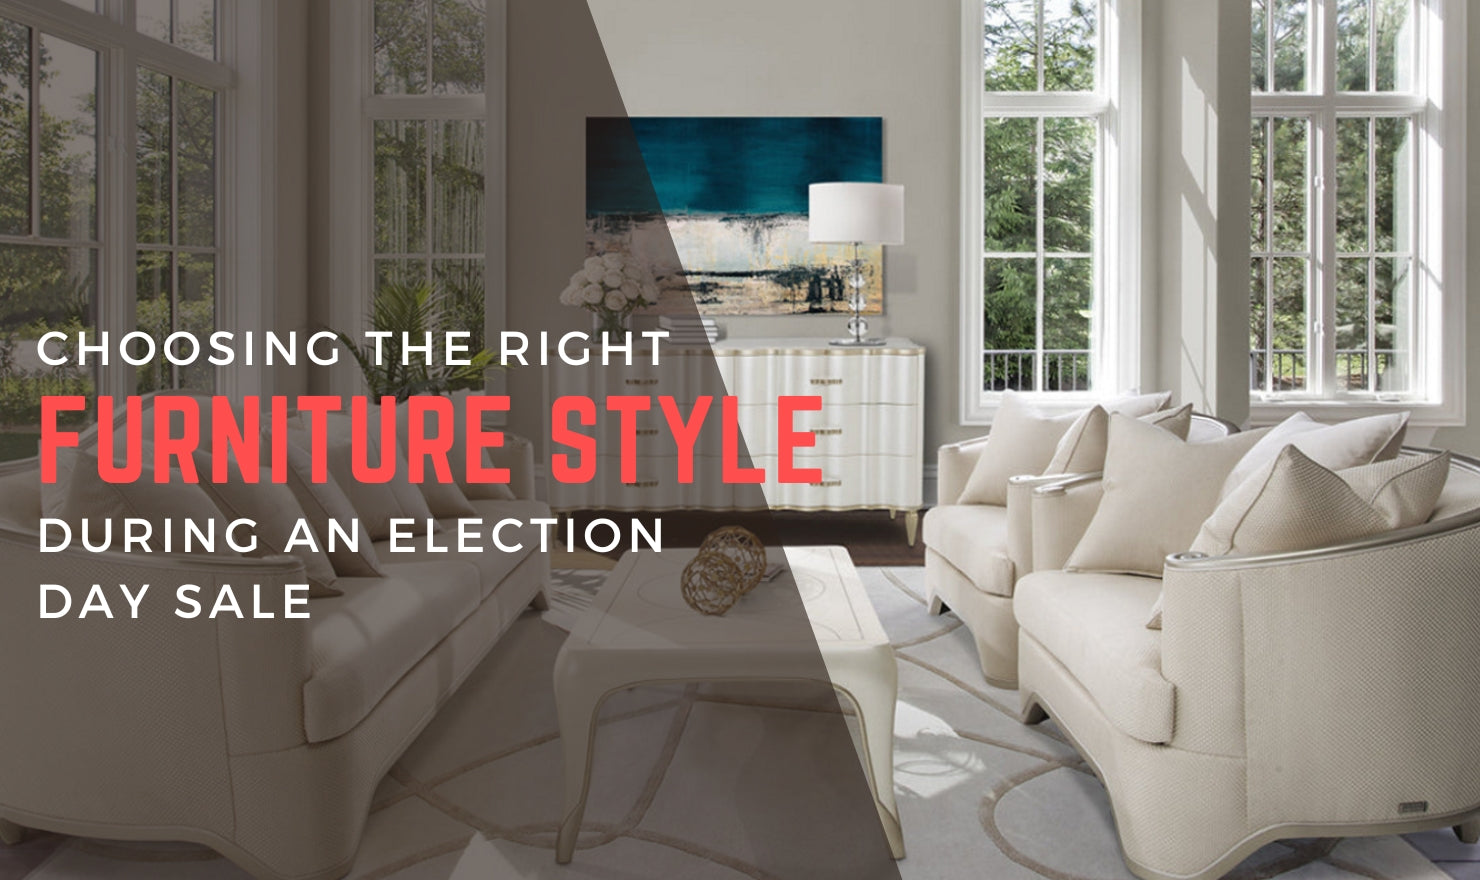 Choosing the Right Furniture Style During an Election Day Sale